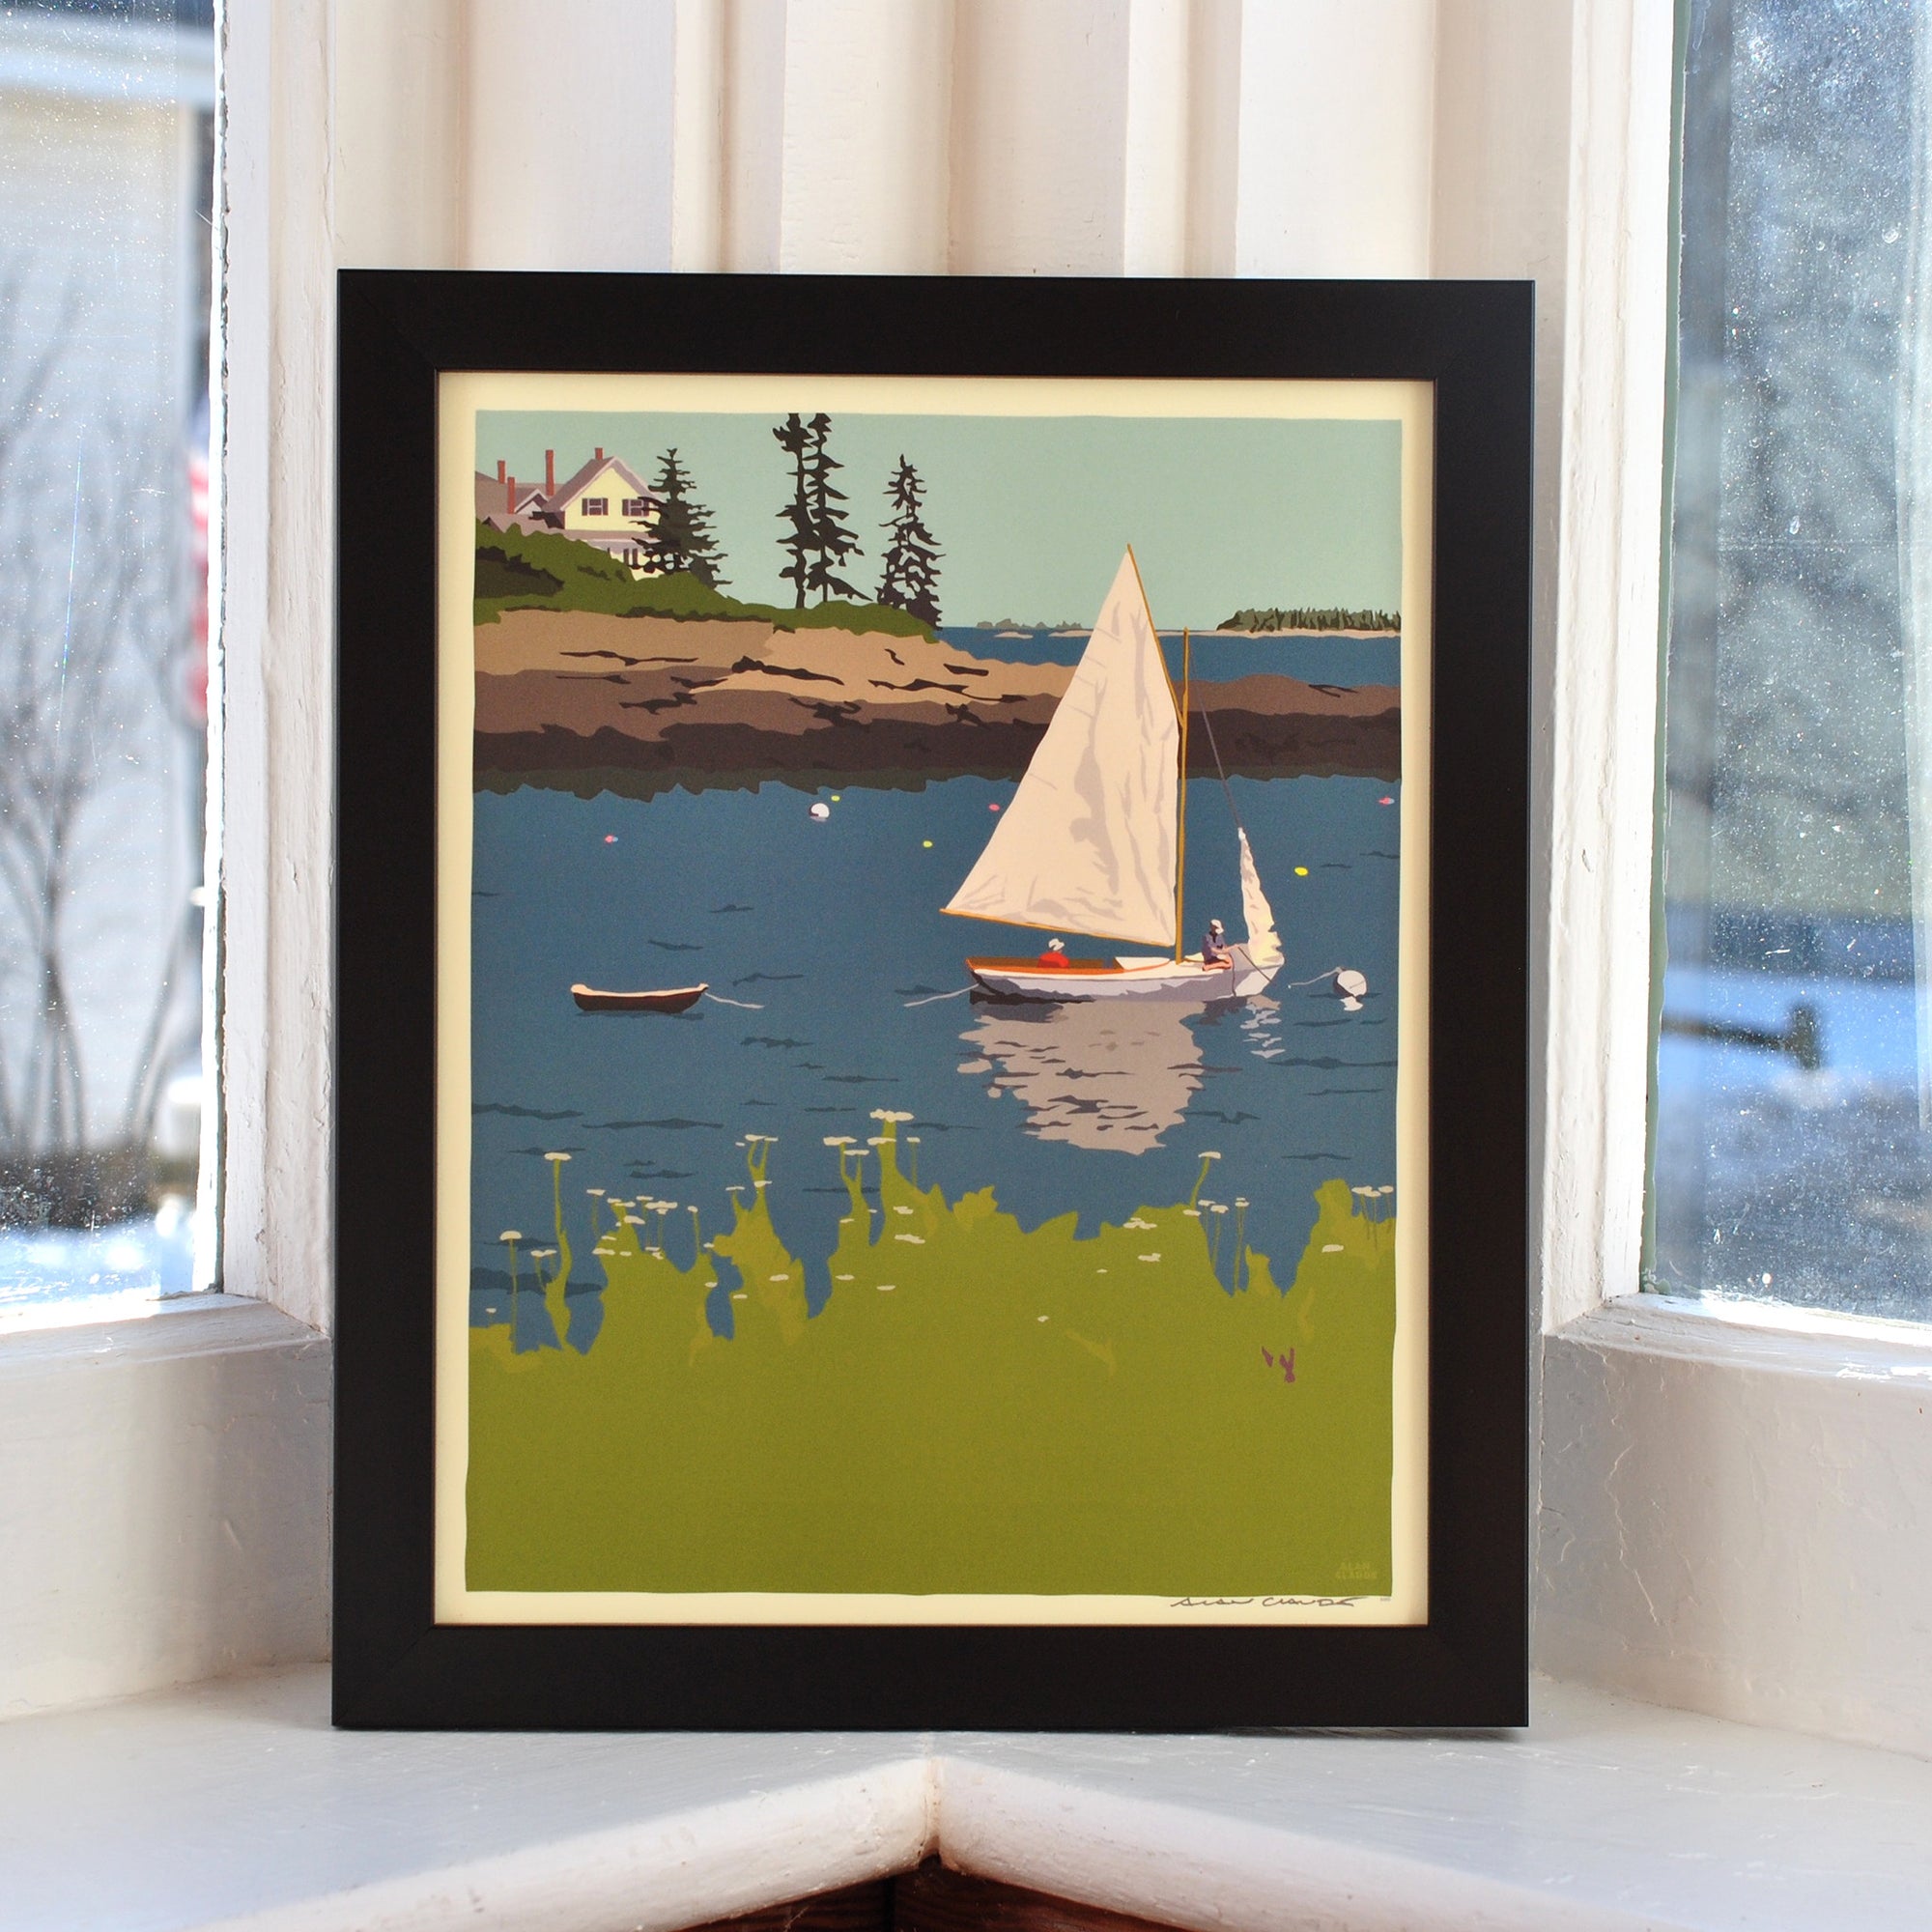 Sailing Long Cove Art Print 8" x 10" Framed Wall Poster By Alan Claude - Maine